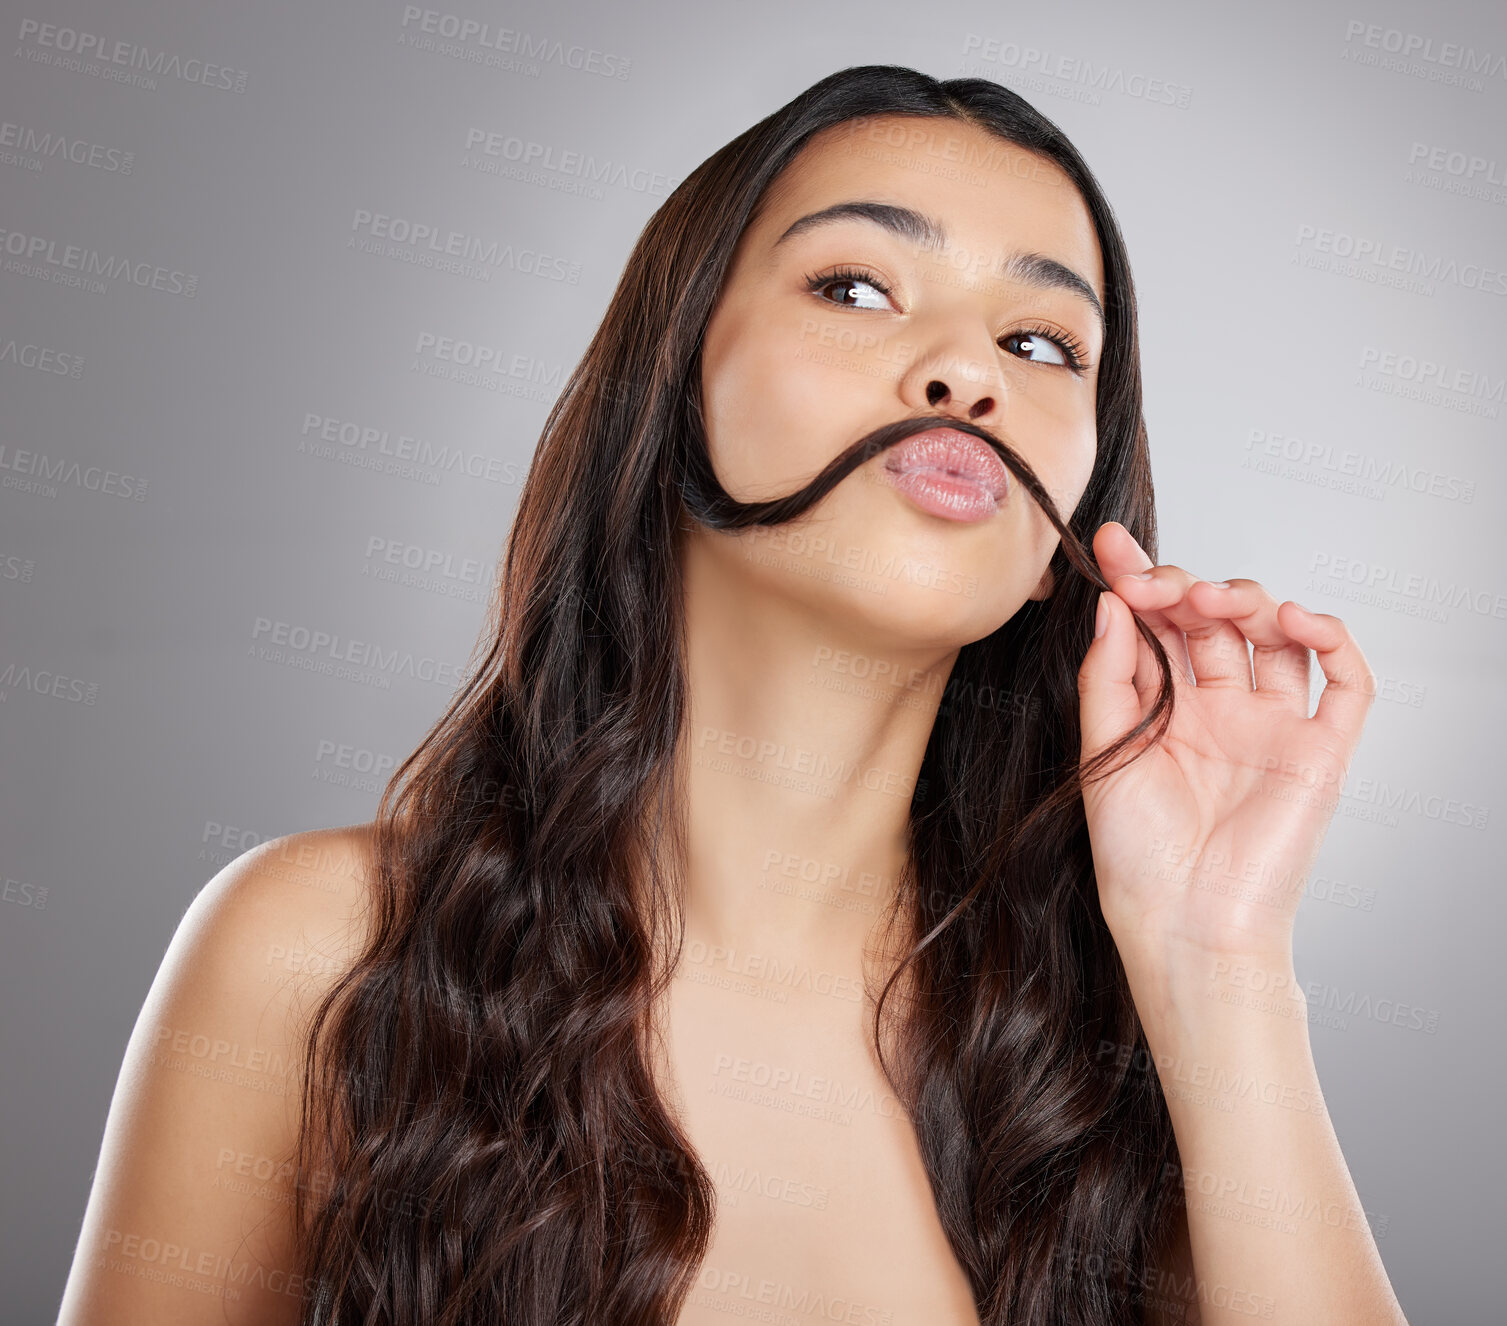 Buy stock photo Studio shot of an attractive young woman making a moustache with her hair against a grey background